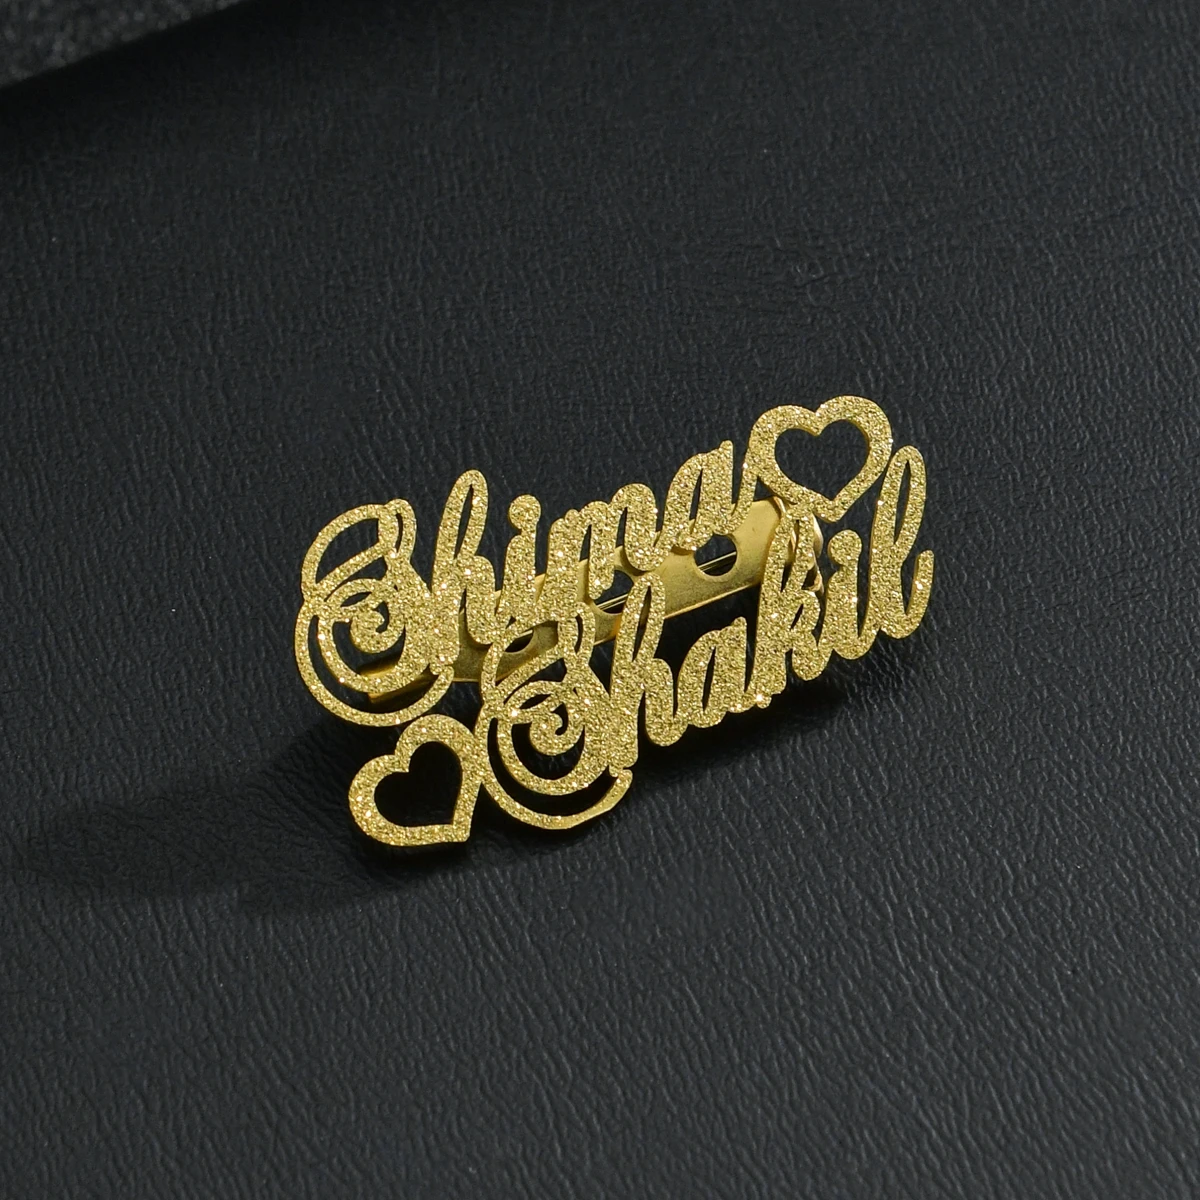 

Personalized Brooch Pin Customizable Frosted Jewelry Gold Color Stainless Steel Fashion Letter Broochs for Women Gift